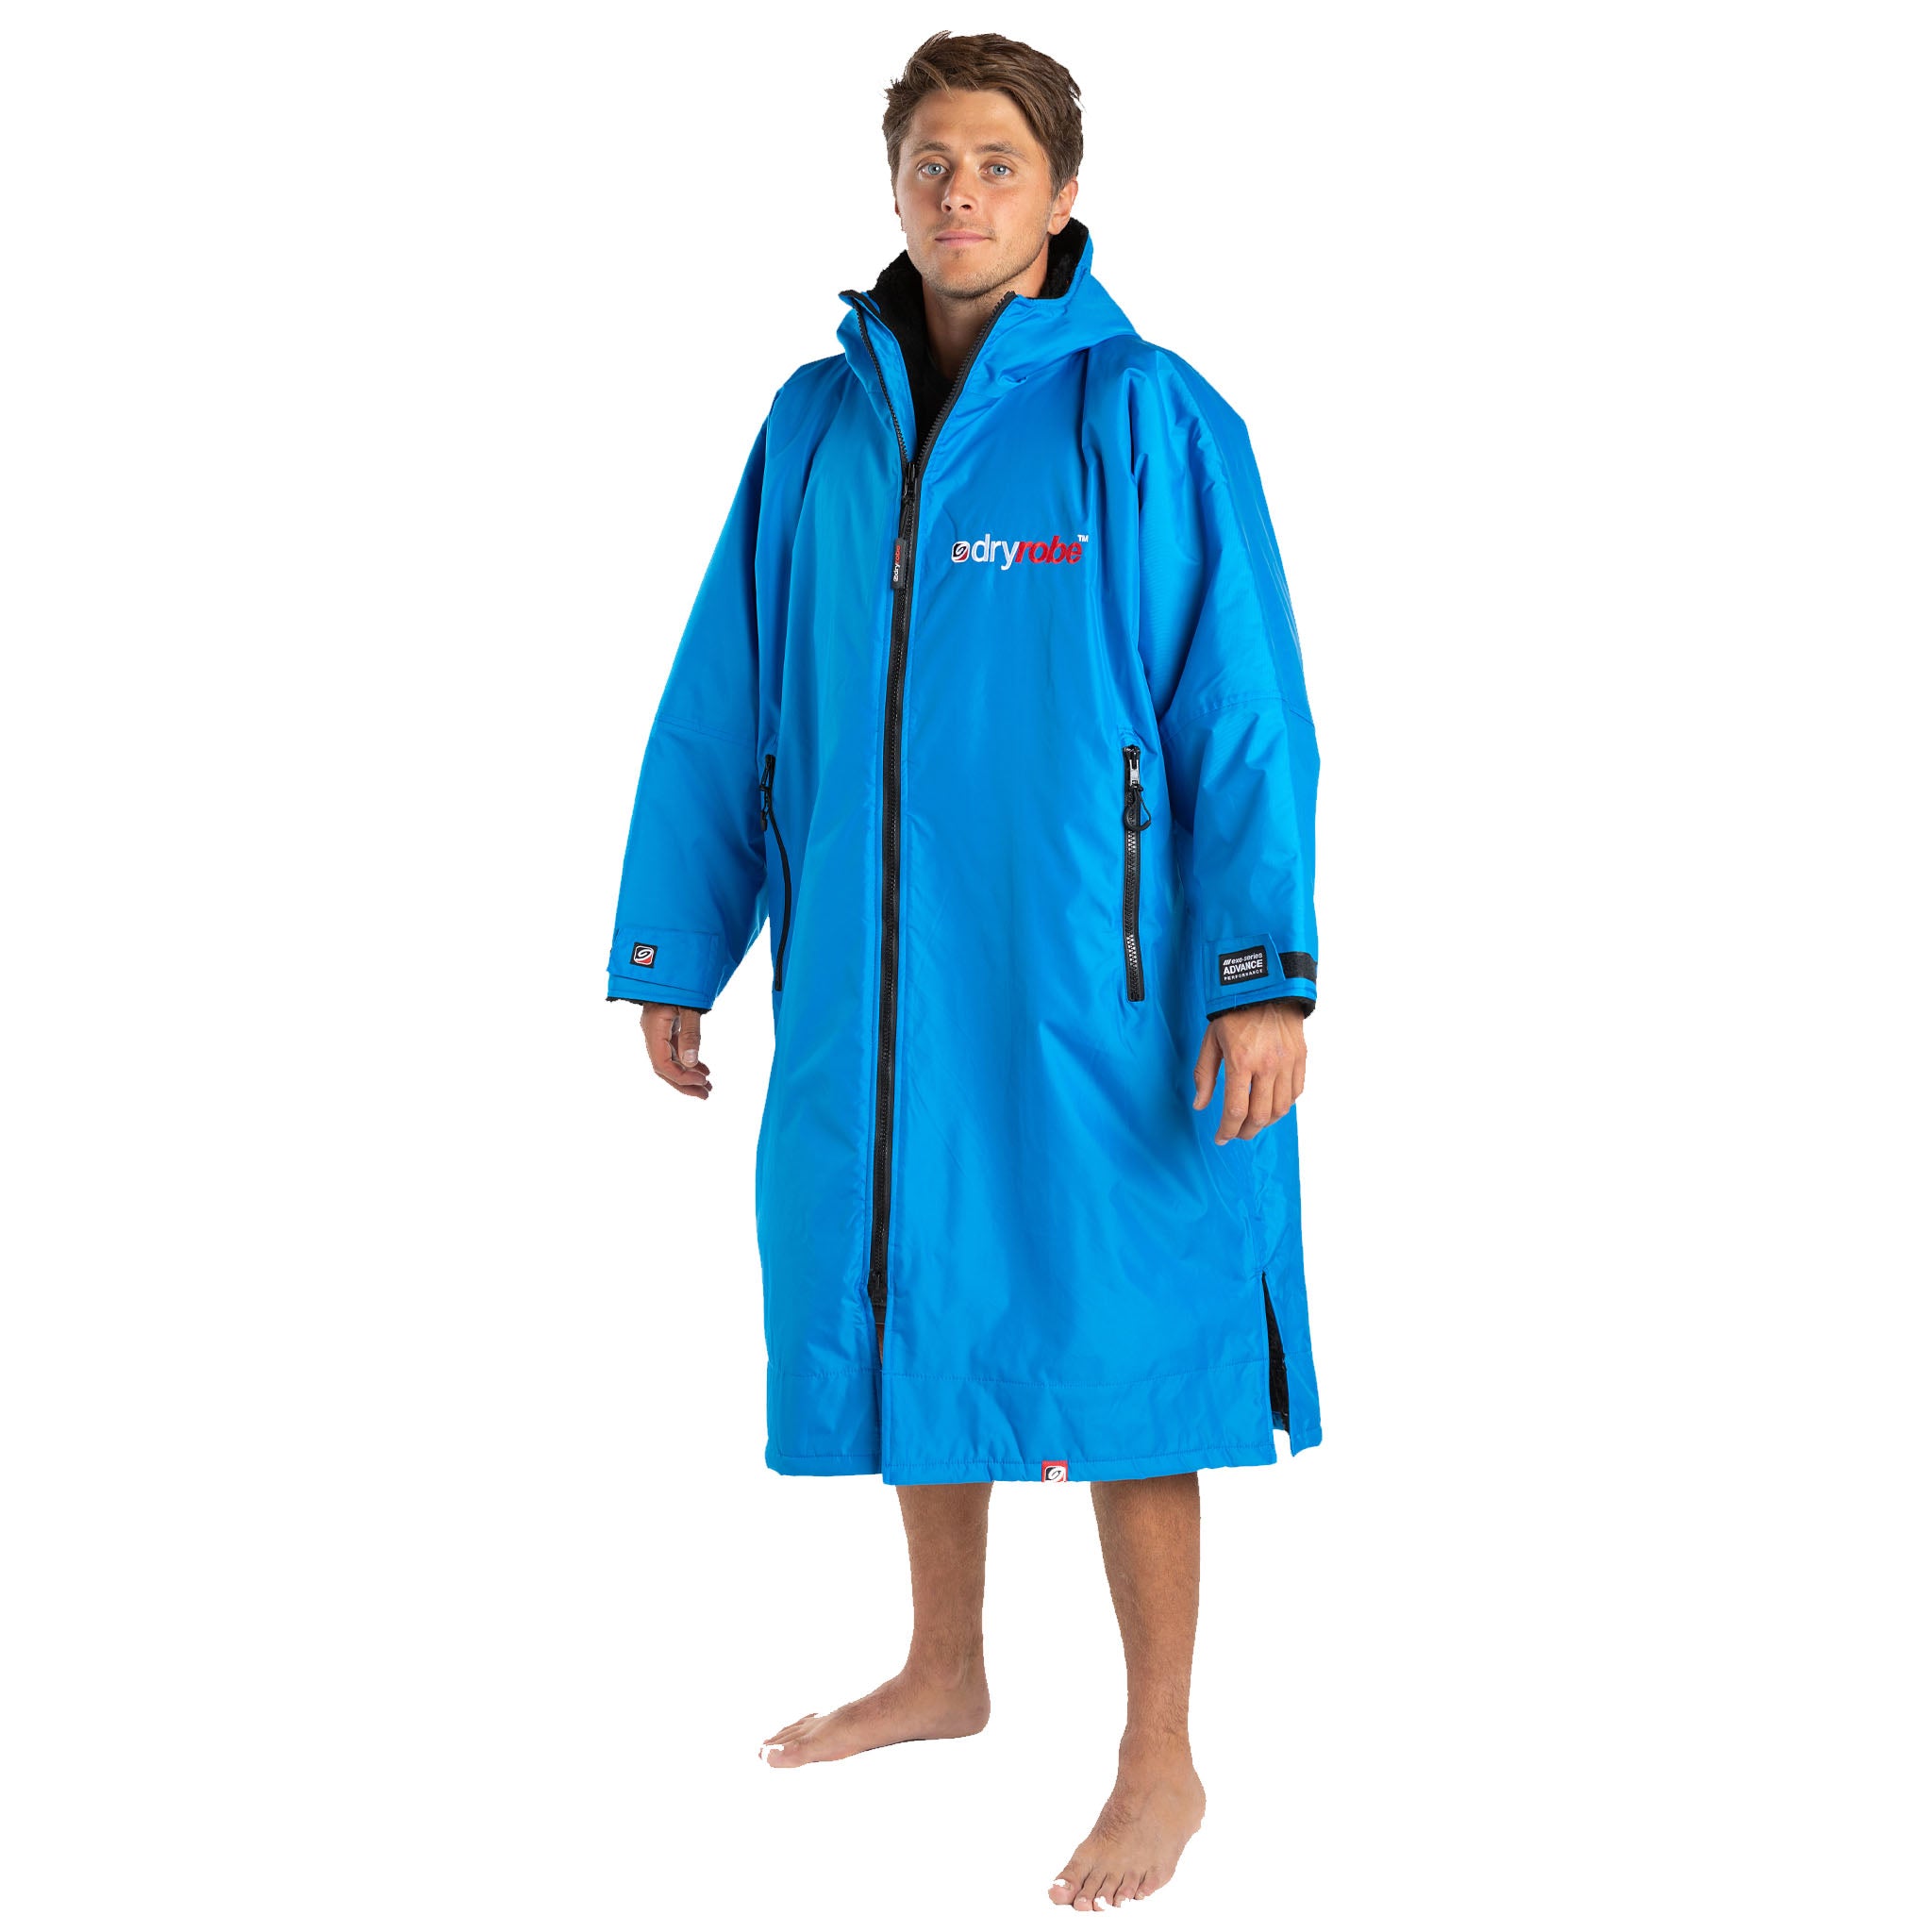 dryrobe Advance Long Sleeve all weather change robe | Cobalt Blue Front